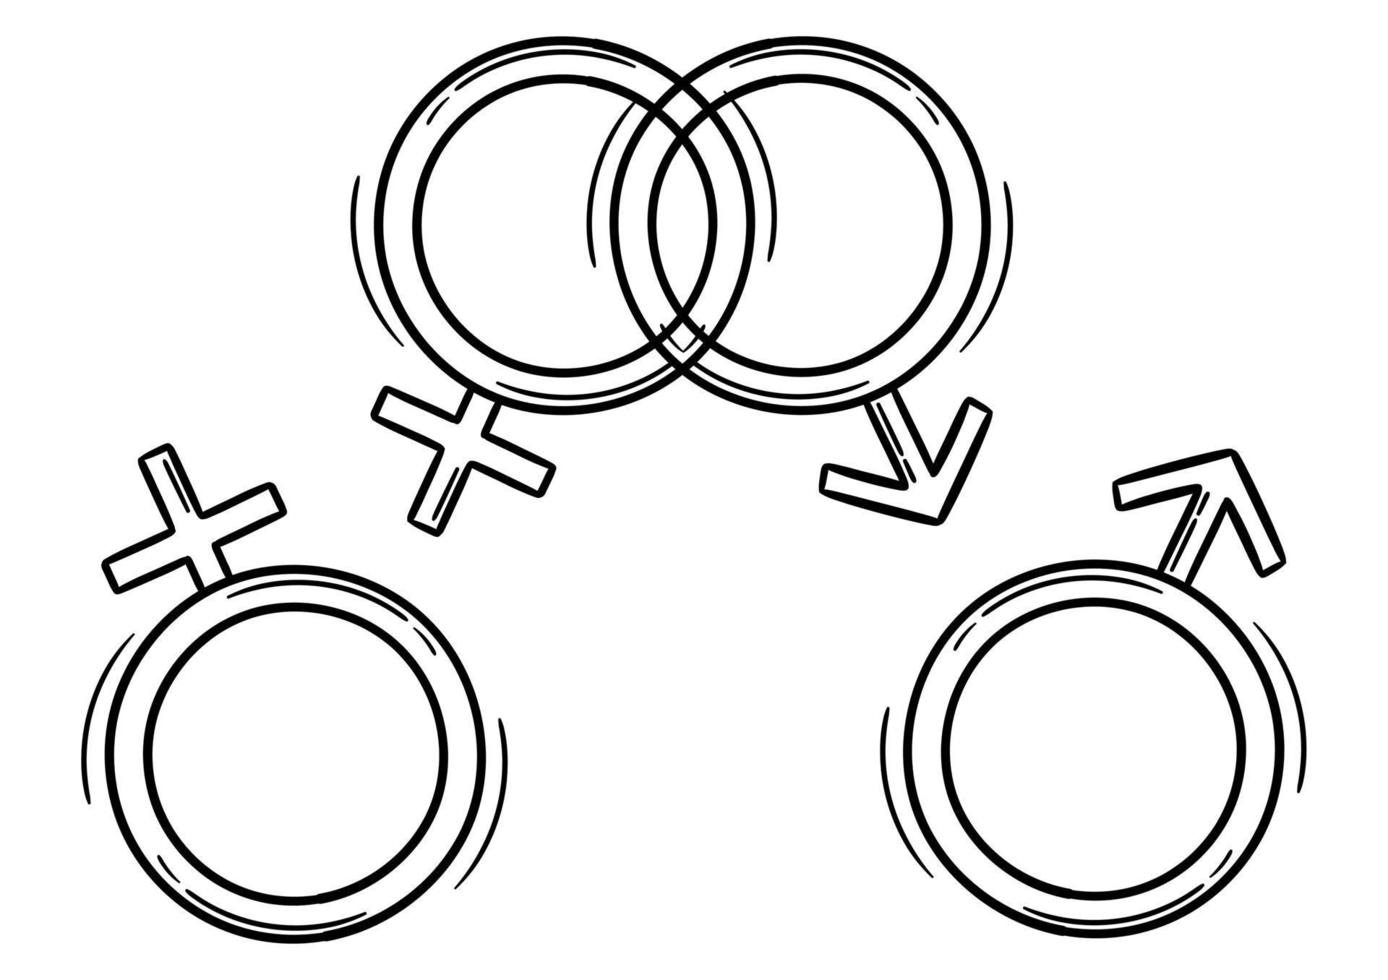 hand drawn illustration of male and female gender symbols vector